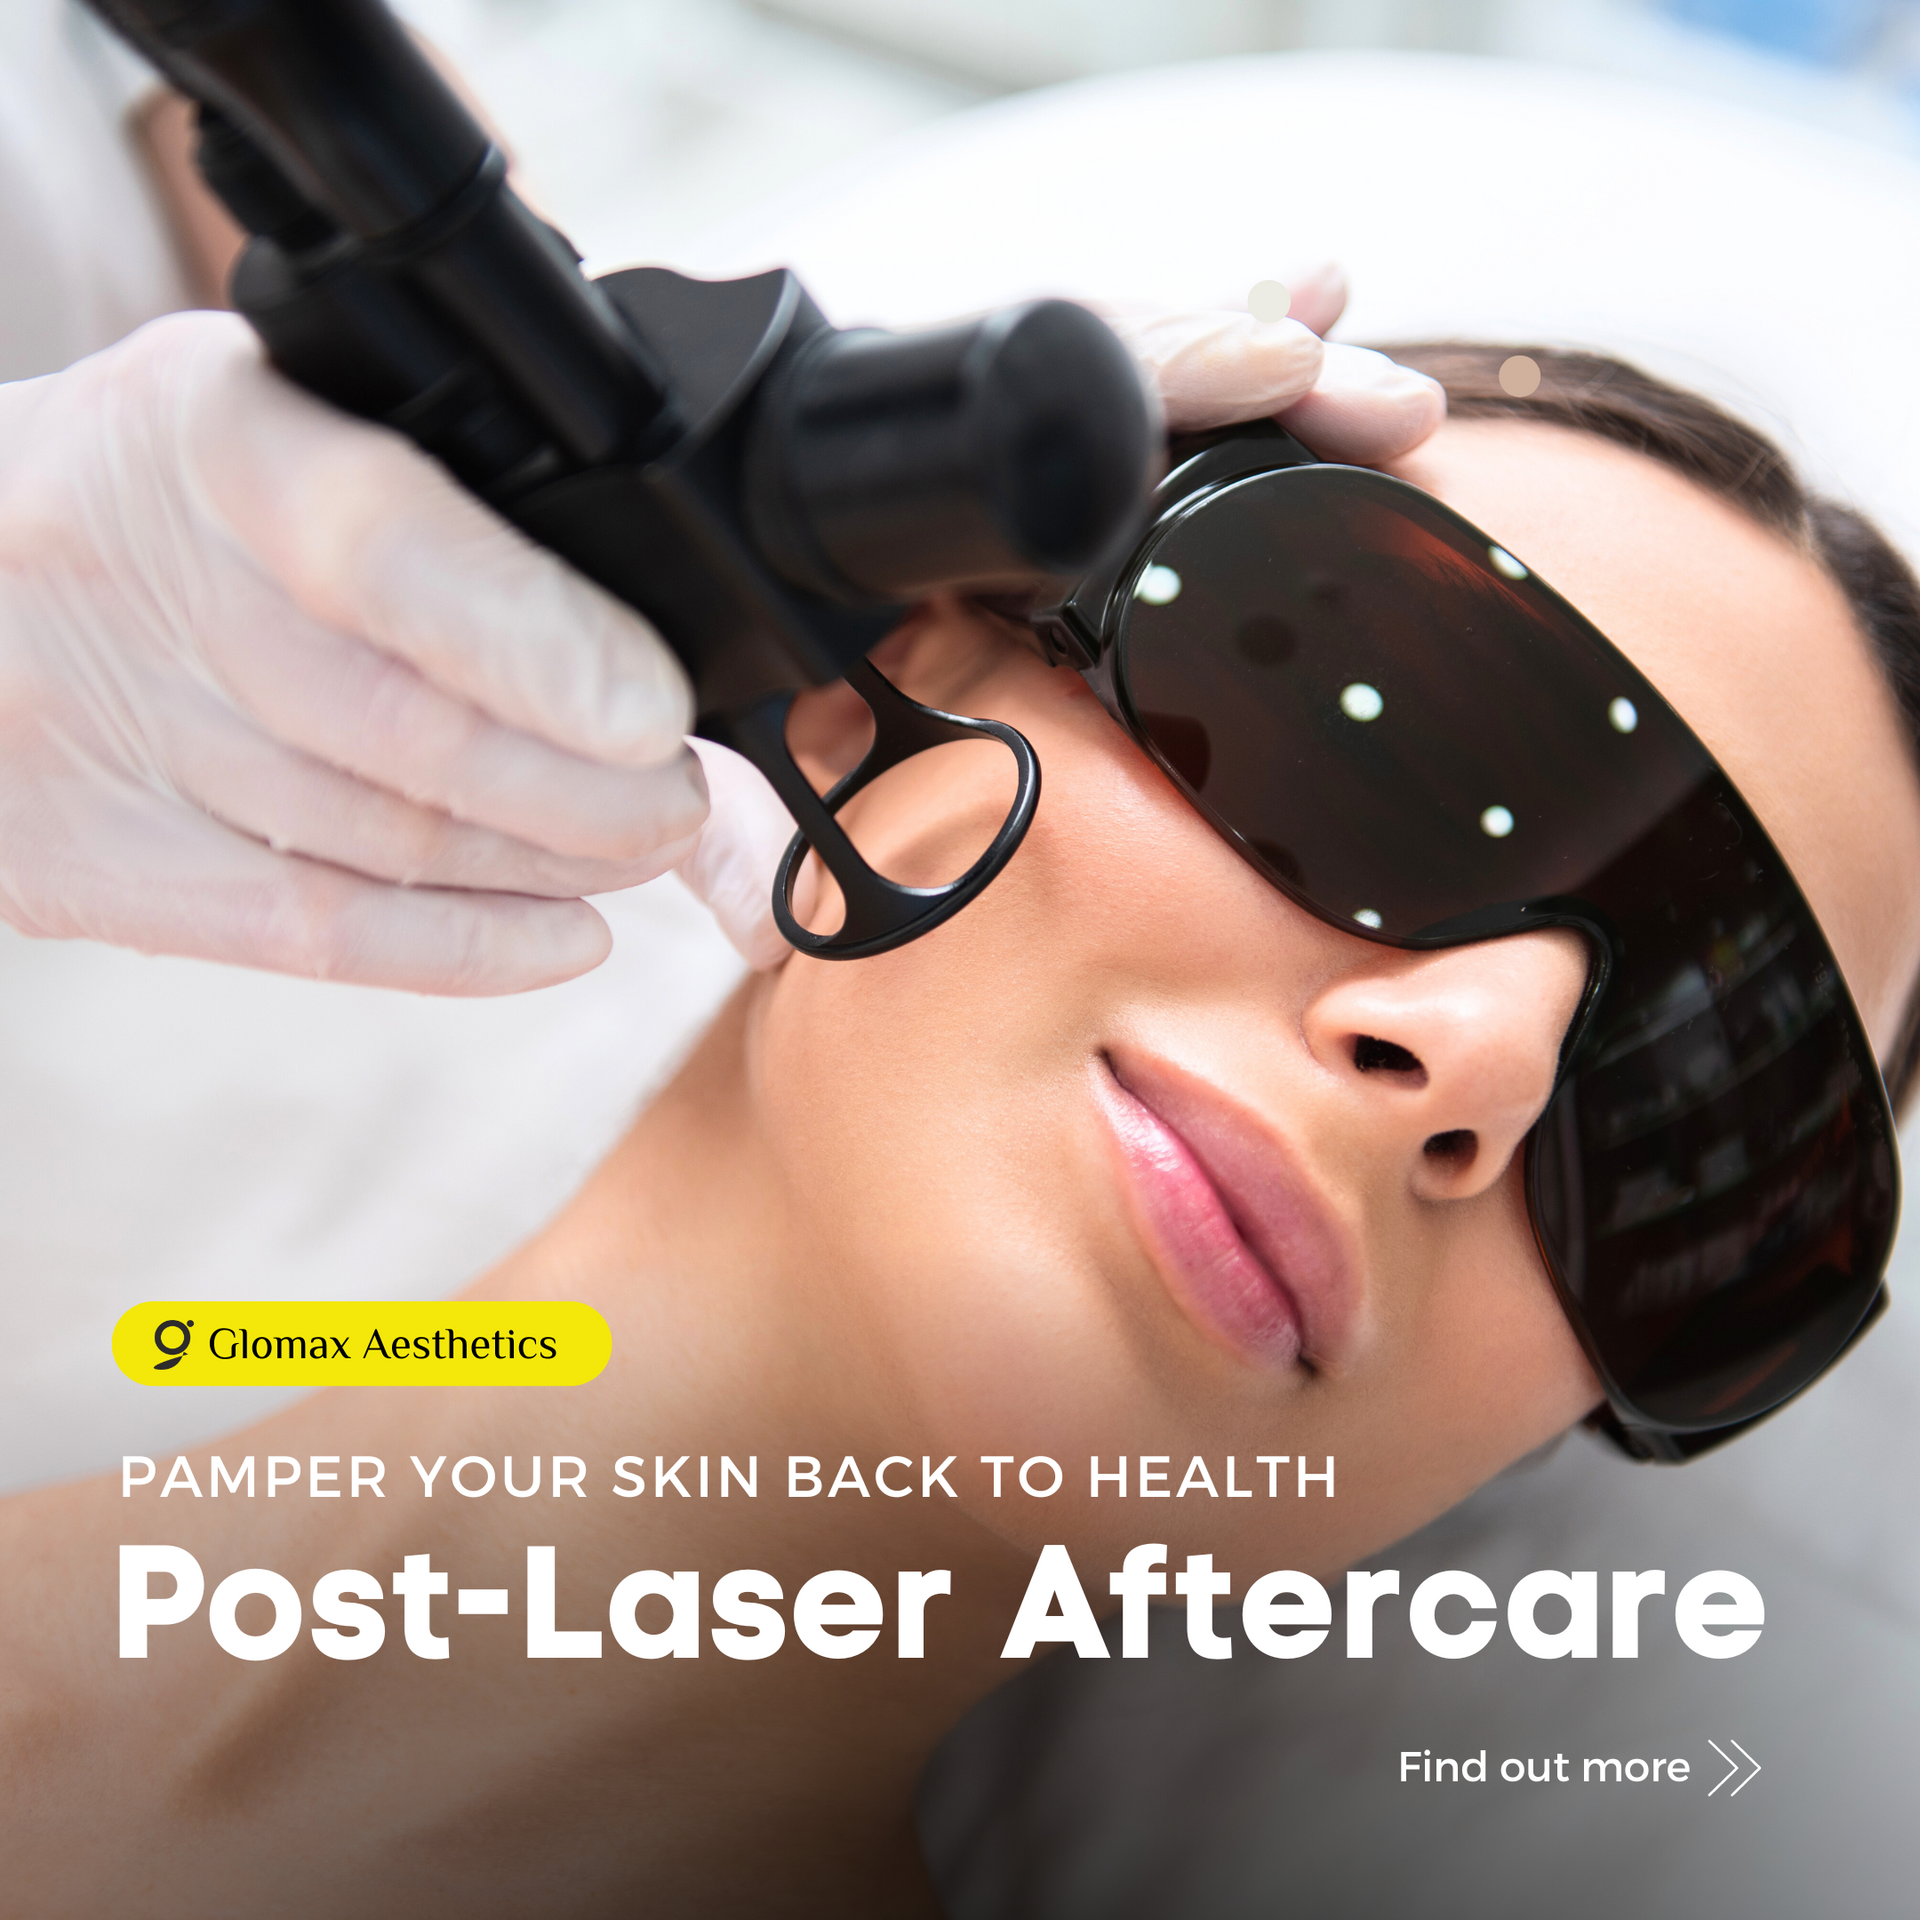 Post-Laser Treatment - Soothe and Heal with SOS Soothing Treatment at Glomax Aesthetics